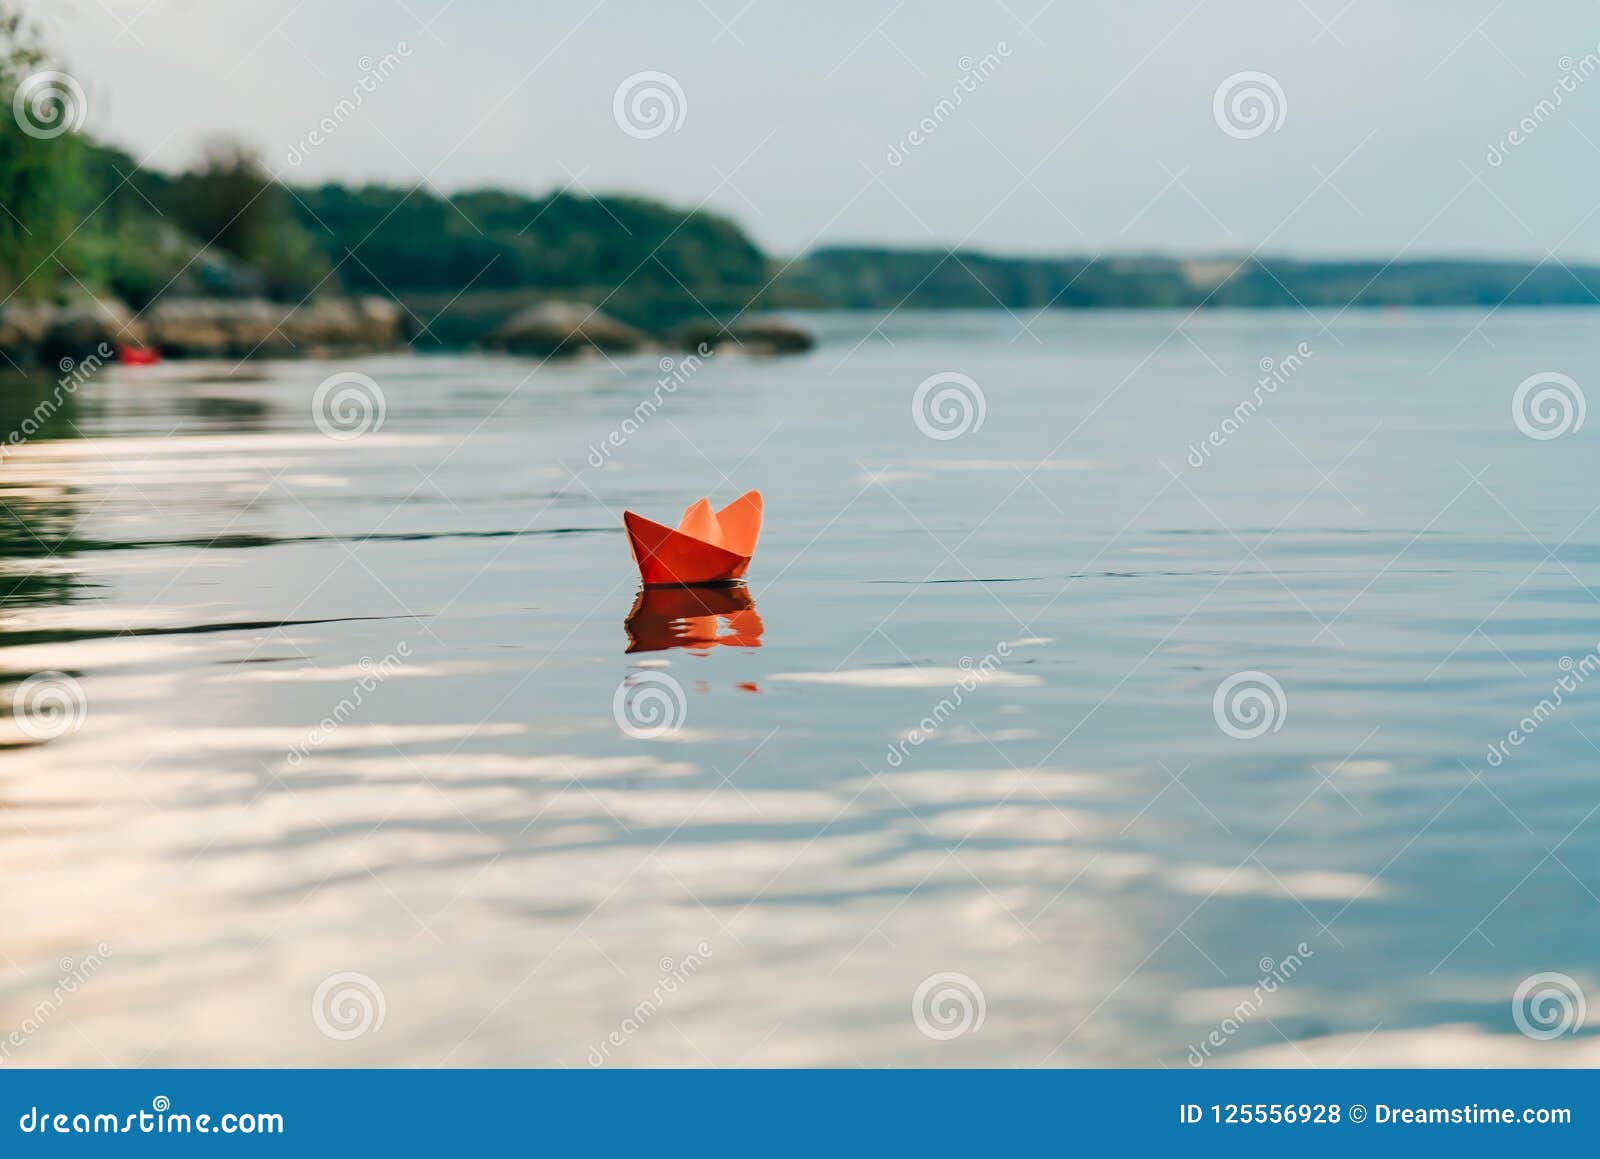 a paper boat sails by the river in the summer. it has an orange color and floats downstream along the shore